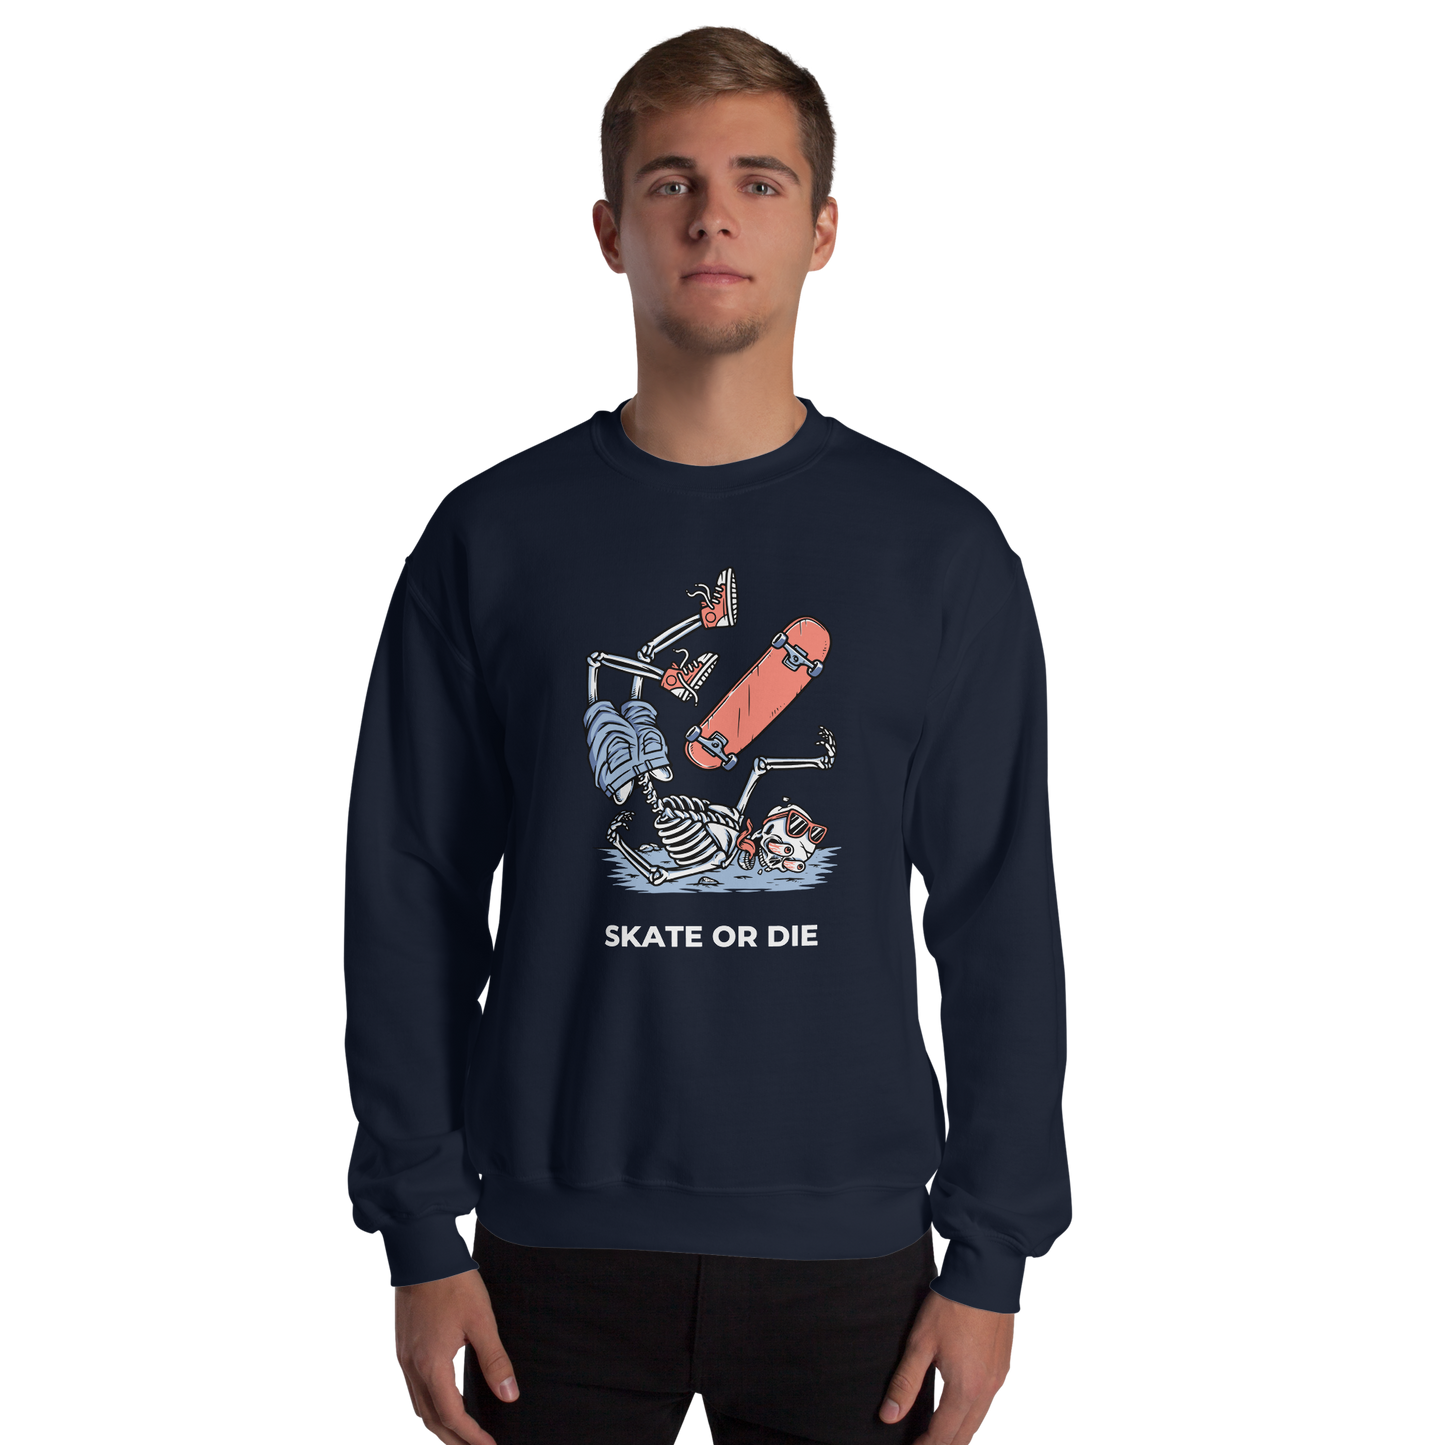 Man wearing a Navy Skate or Die Sweatshirt featuring a daring Skeleton Falling While Skateboarding graphic on the chest - Cool Graphic Skeleton Sweatshirts - Boozy Fox